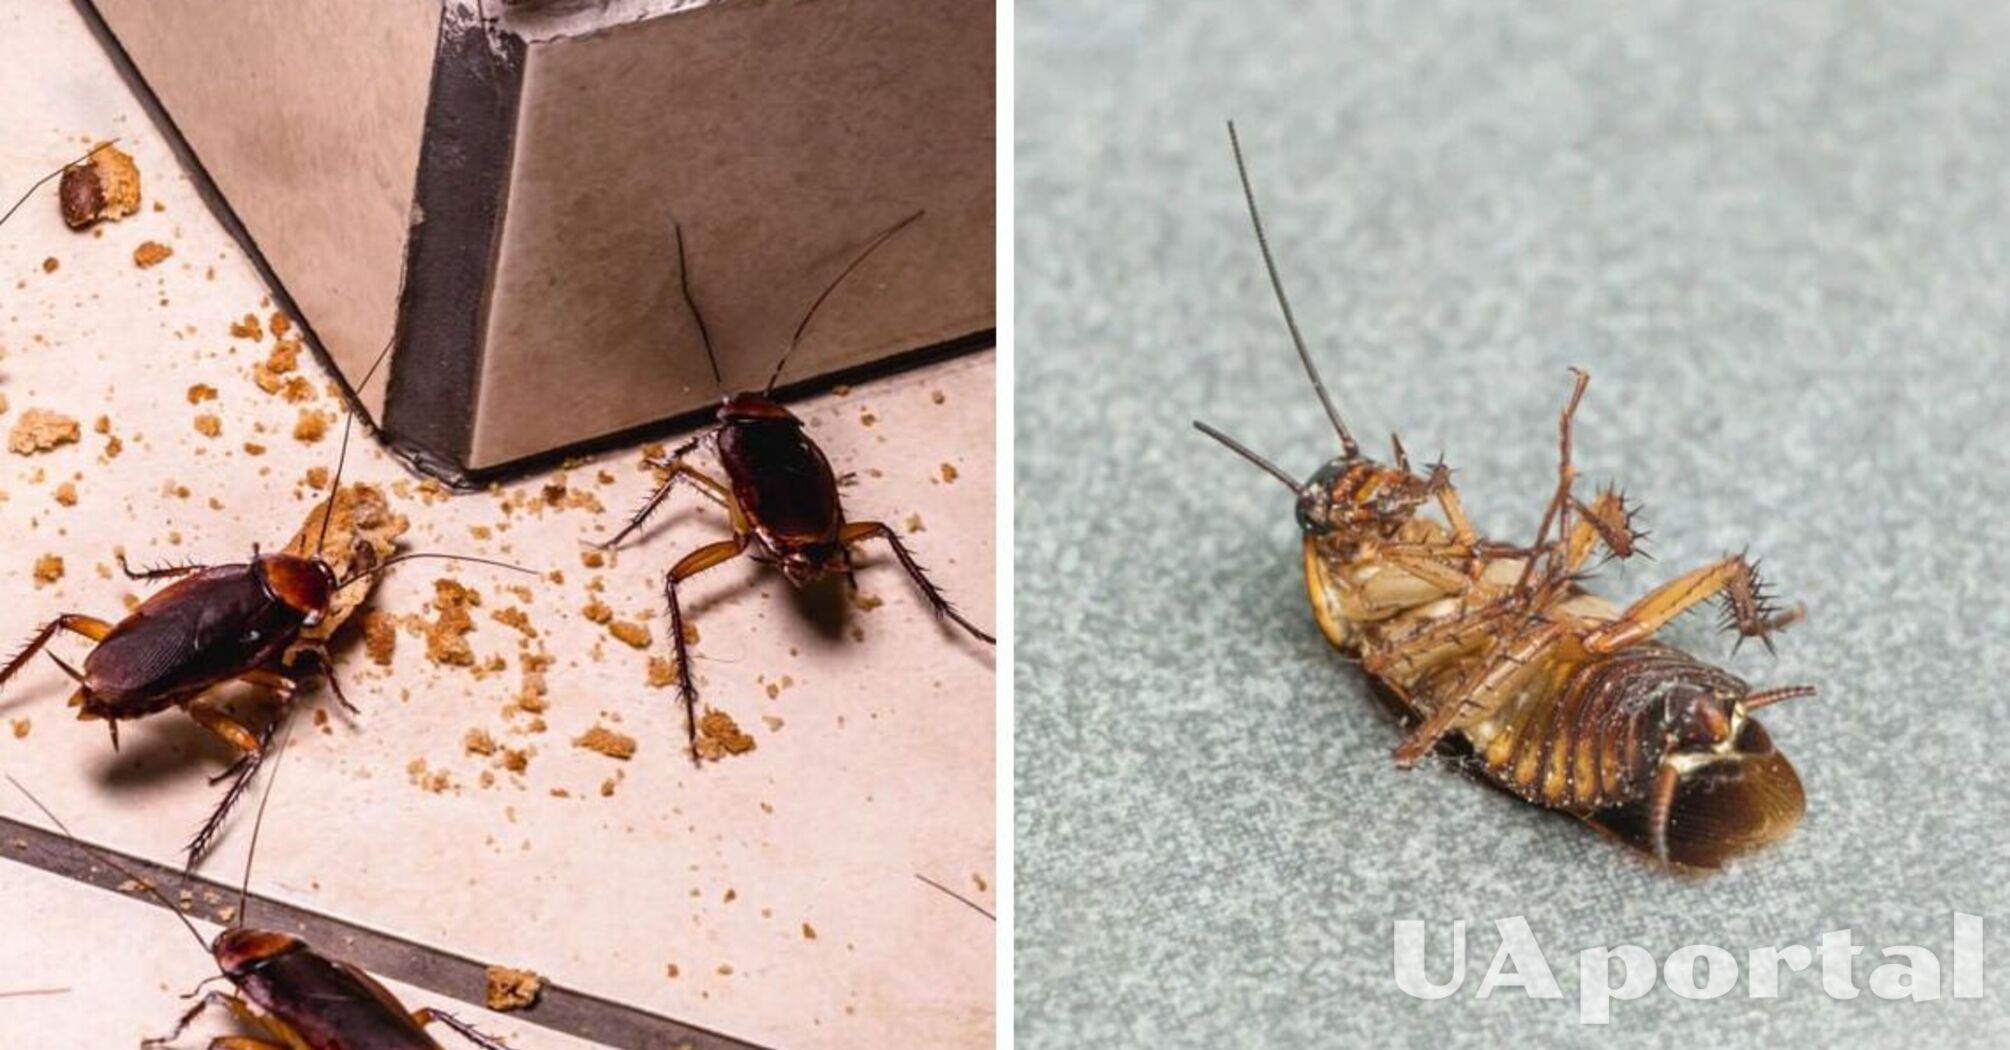 Cockroaches will leave your home on their own: how to make a natural pest control product